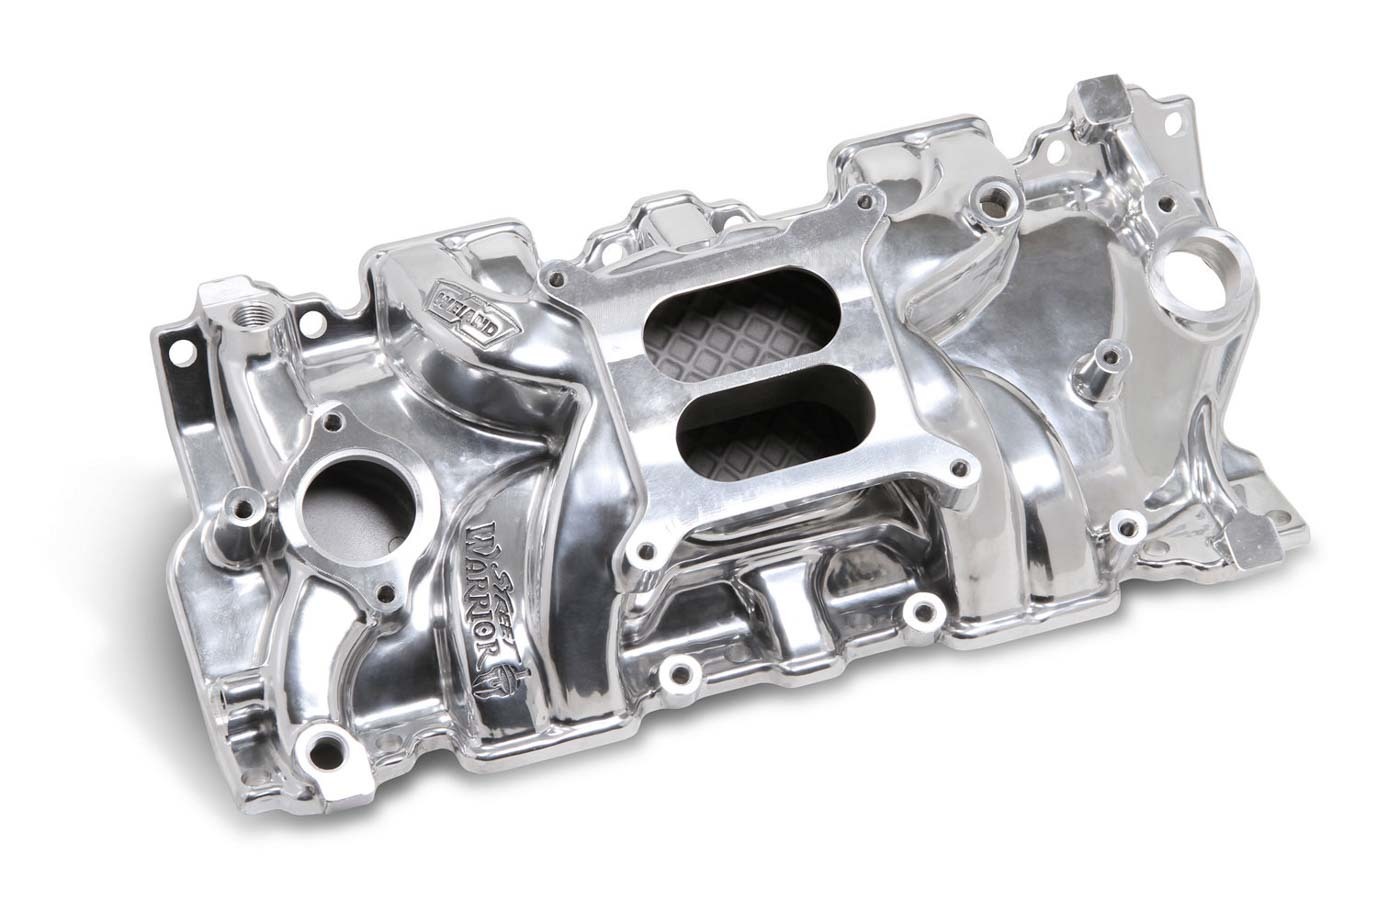 Weiand 8120P Intake Manifold, Street Warrior, Square Bore, Dual Plane, Aluminum, Polished, Small Block Chevy, Each